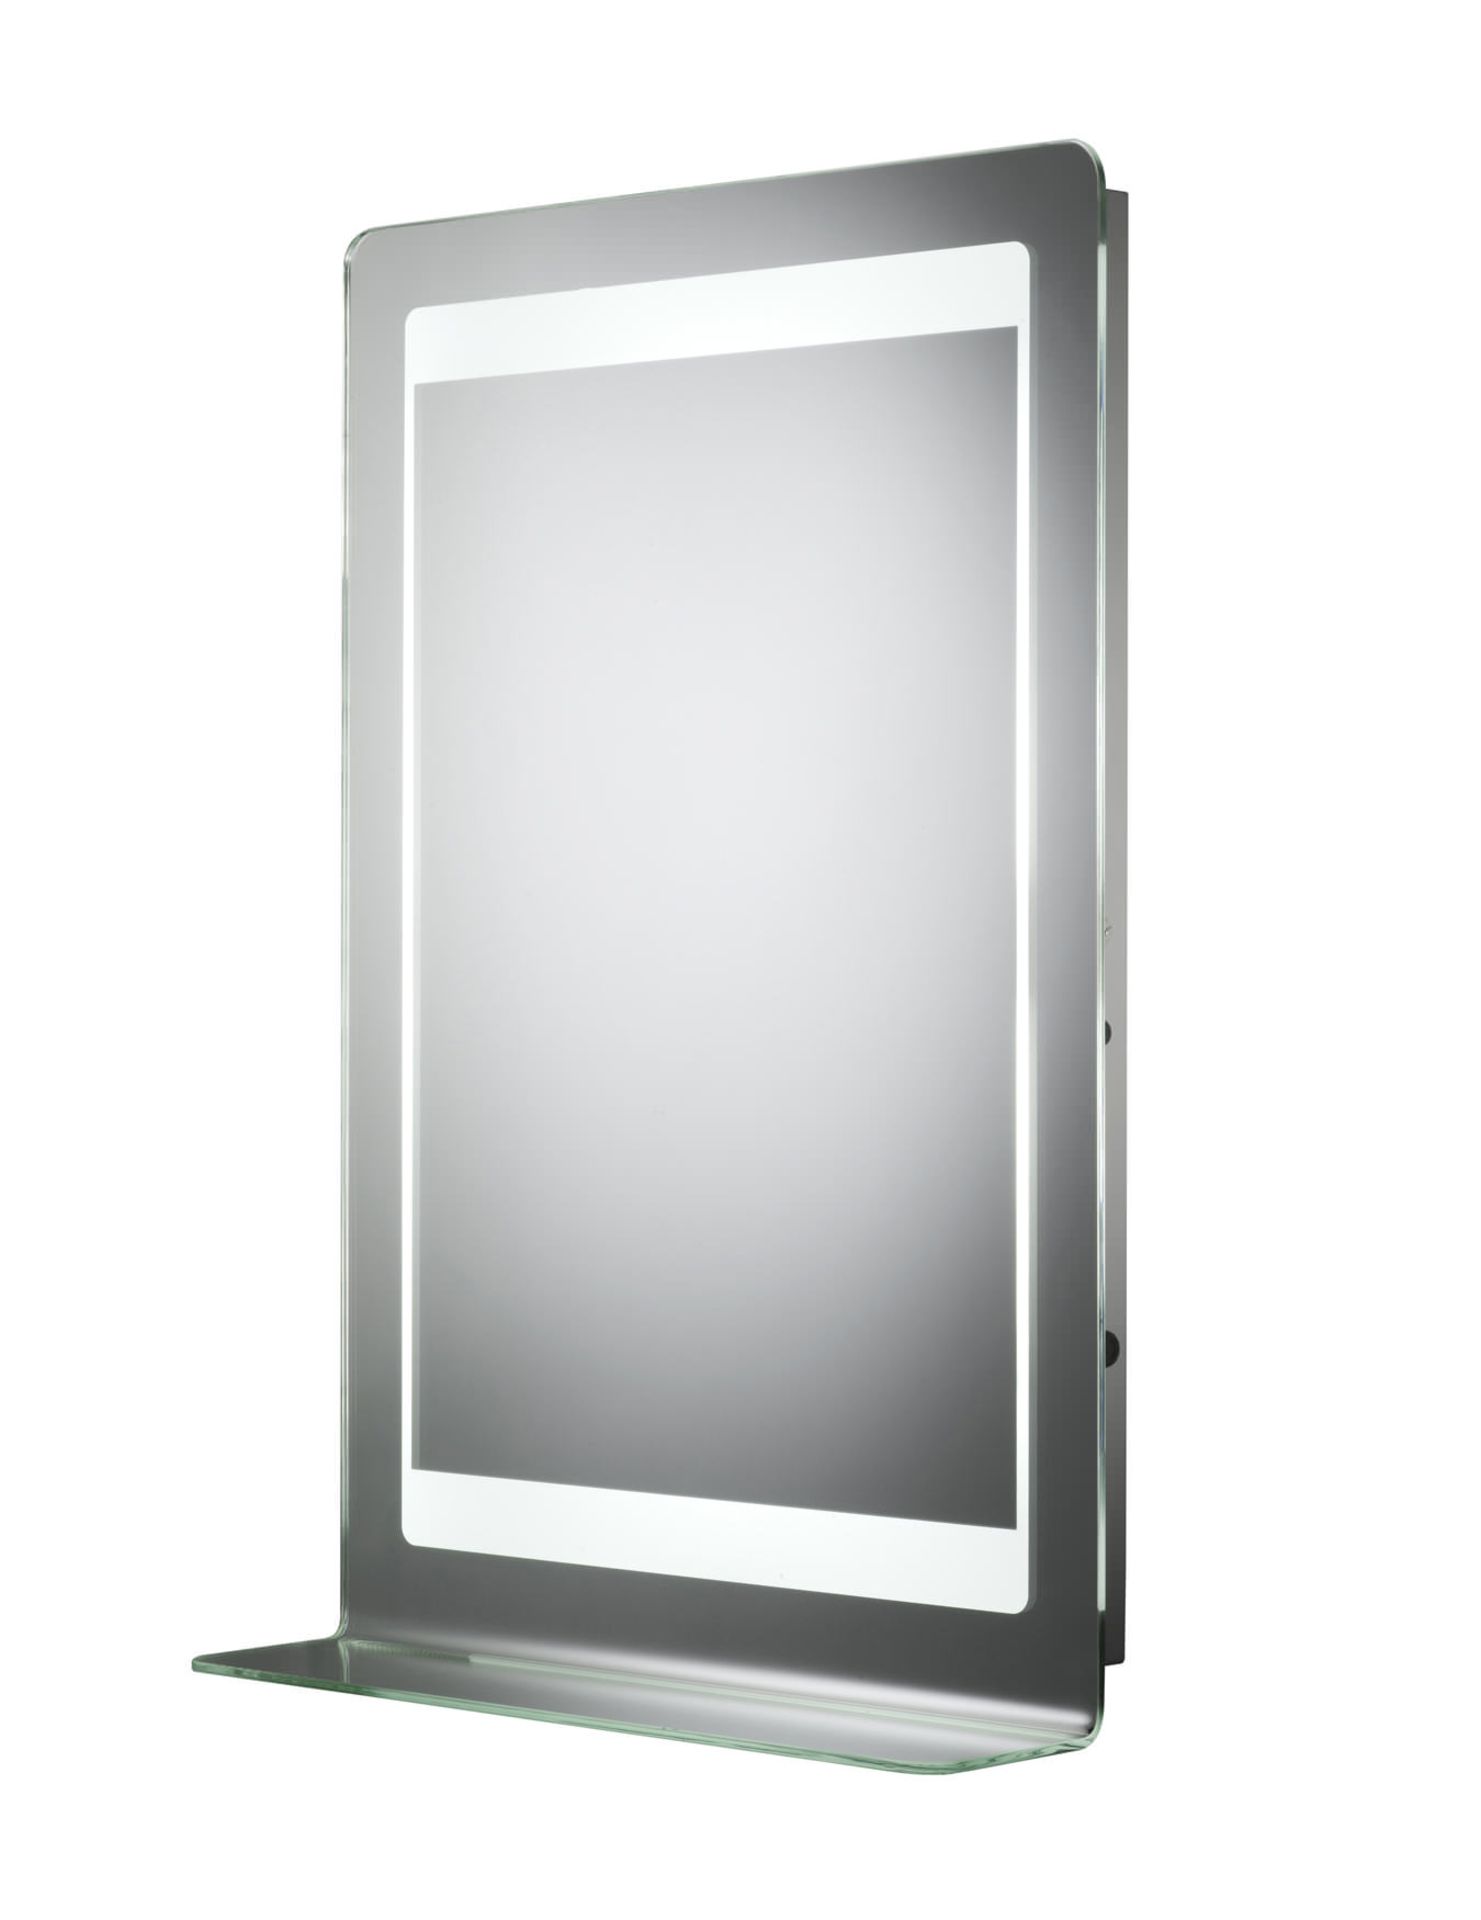 1 x BOXED ROPER ROADS GAMMA BACKLIT MIRROR WITH SELF (24447) RRP £380 (DSS) *PLEASE NOTE THAT THE